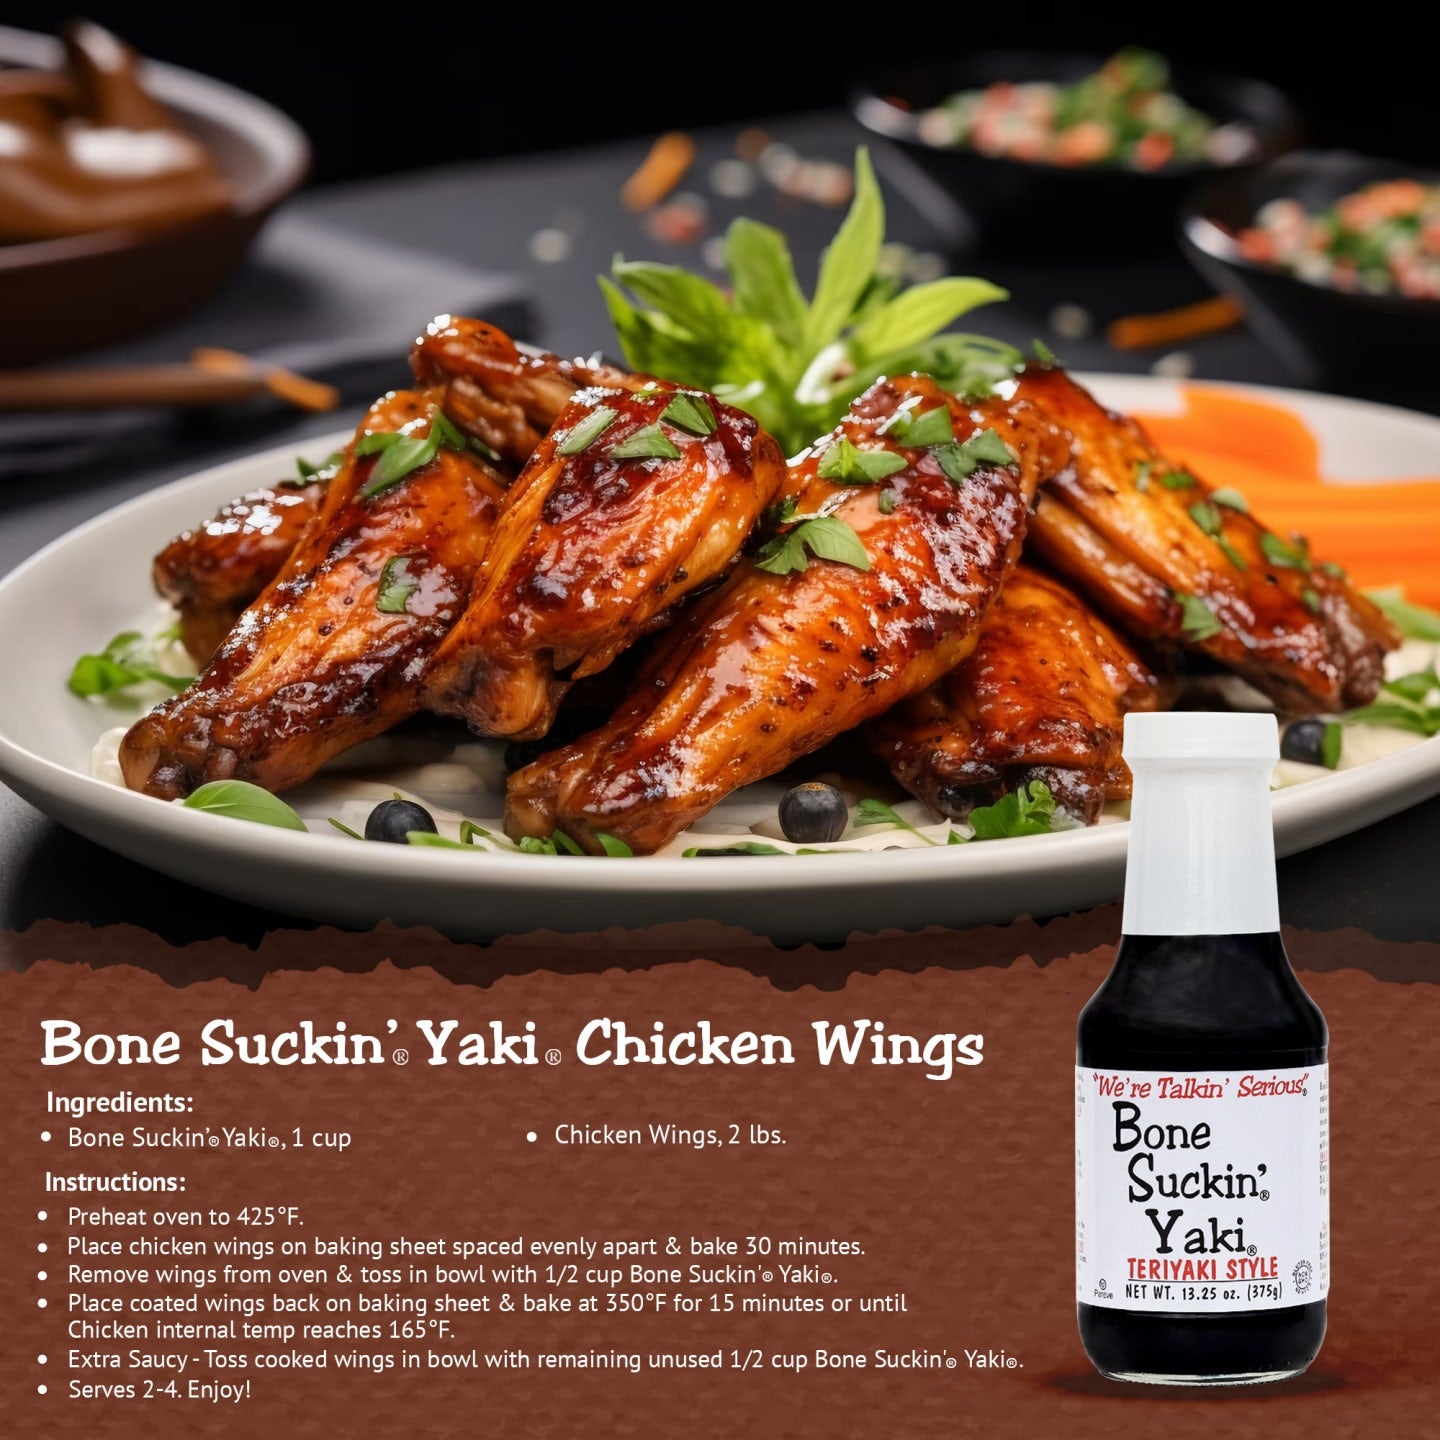 Bone Suckin' Yaki Chicken Wings Recipe. Bone Suckin' Yaki, 1 cup. 2 lbs. chicken wings. Instructions: Preheat oven to 425. Place chicken wings on baking sheet spaced evenly apart & bake 30 minutes. Remove wings from oven & toss in bowl with 1/2 cup Bone Suckin' Yaki. Place coated wings back on baking sheet & bake at 350 for 15 minutes or until chicken internal temp reaches 165. Extra Saucy- Toss cooked wings in bowl with remaining unused 1/2 cup Bone Suckin' Yaki